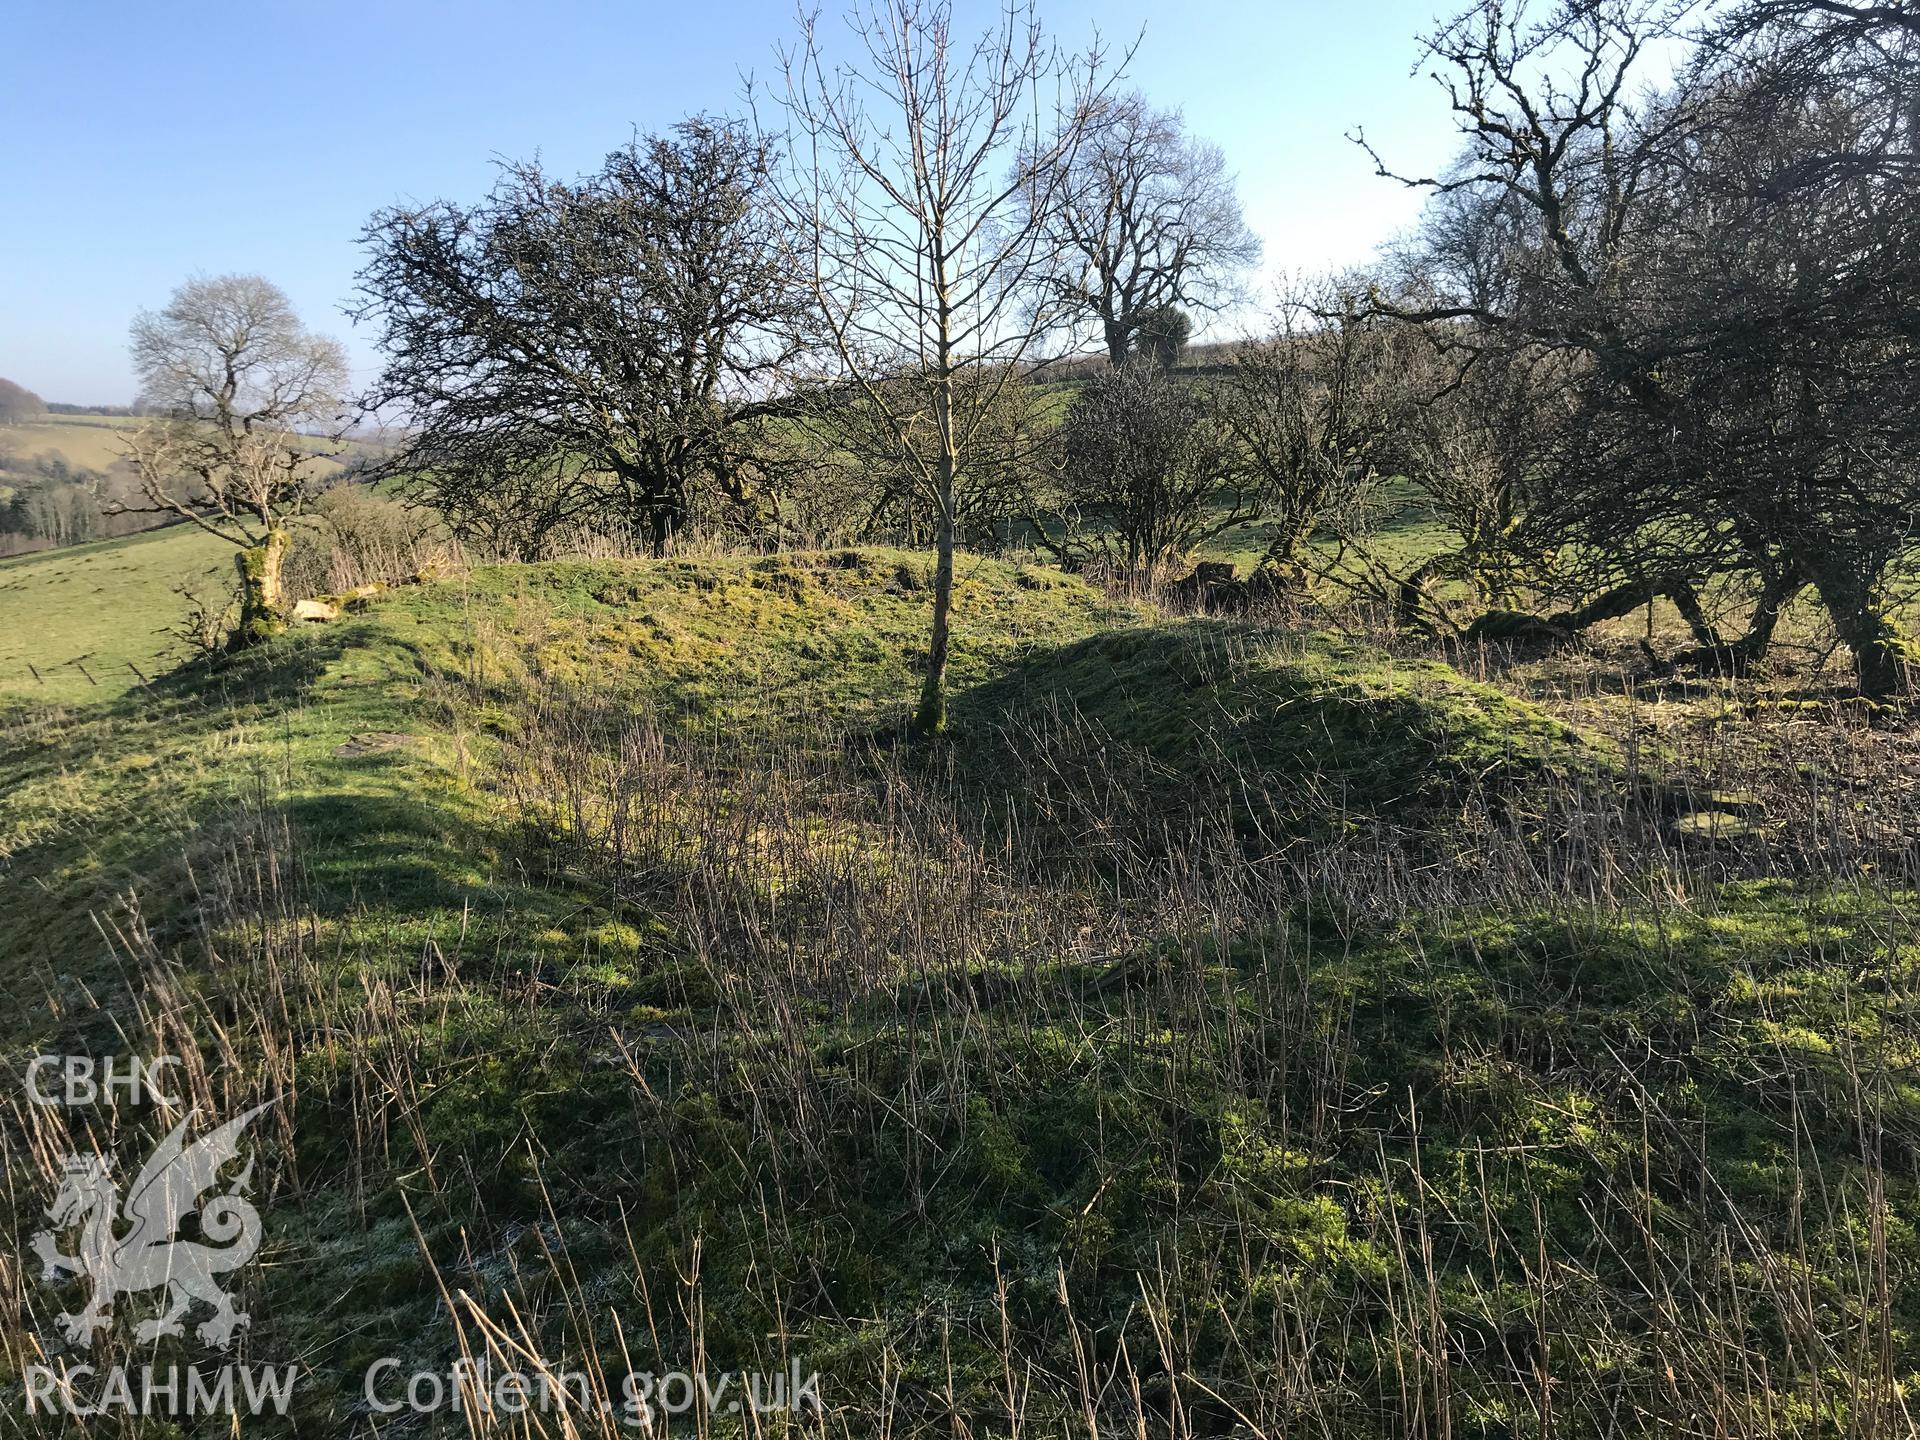 Digital colour photograph showing the site of Ednol Church, west of Presteigne, taken by Paul Davis on 7th February 2020.